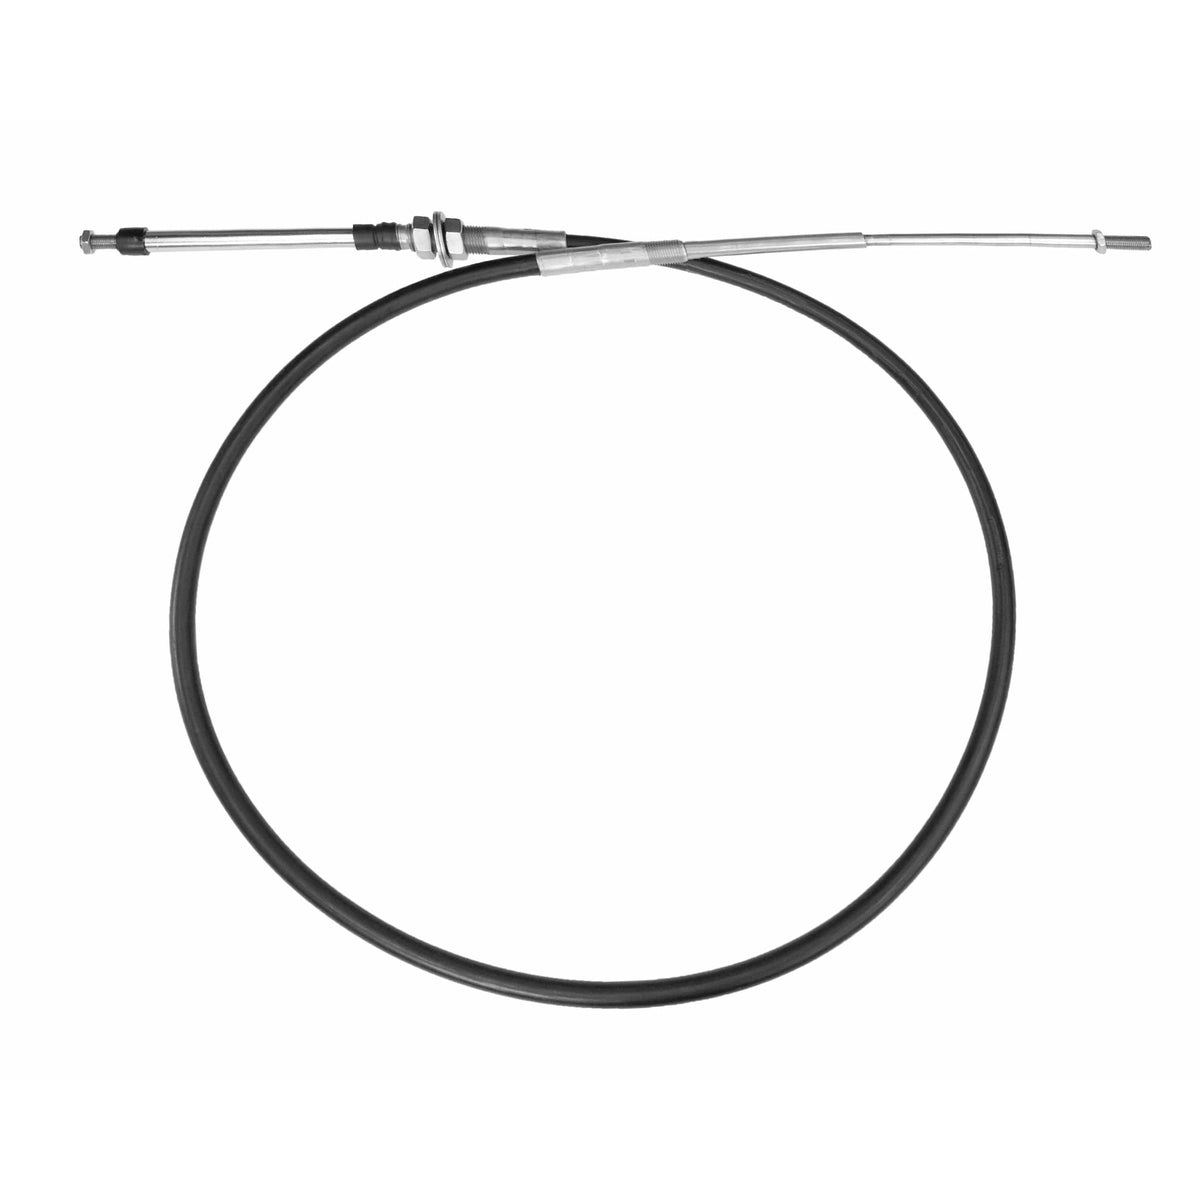 Teleflex Not Qualified for Free Shipping Teleflex Jet Boat Steering Cable 13' #SSC21913